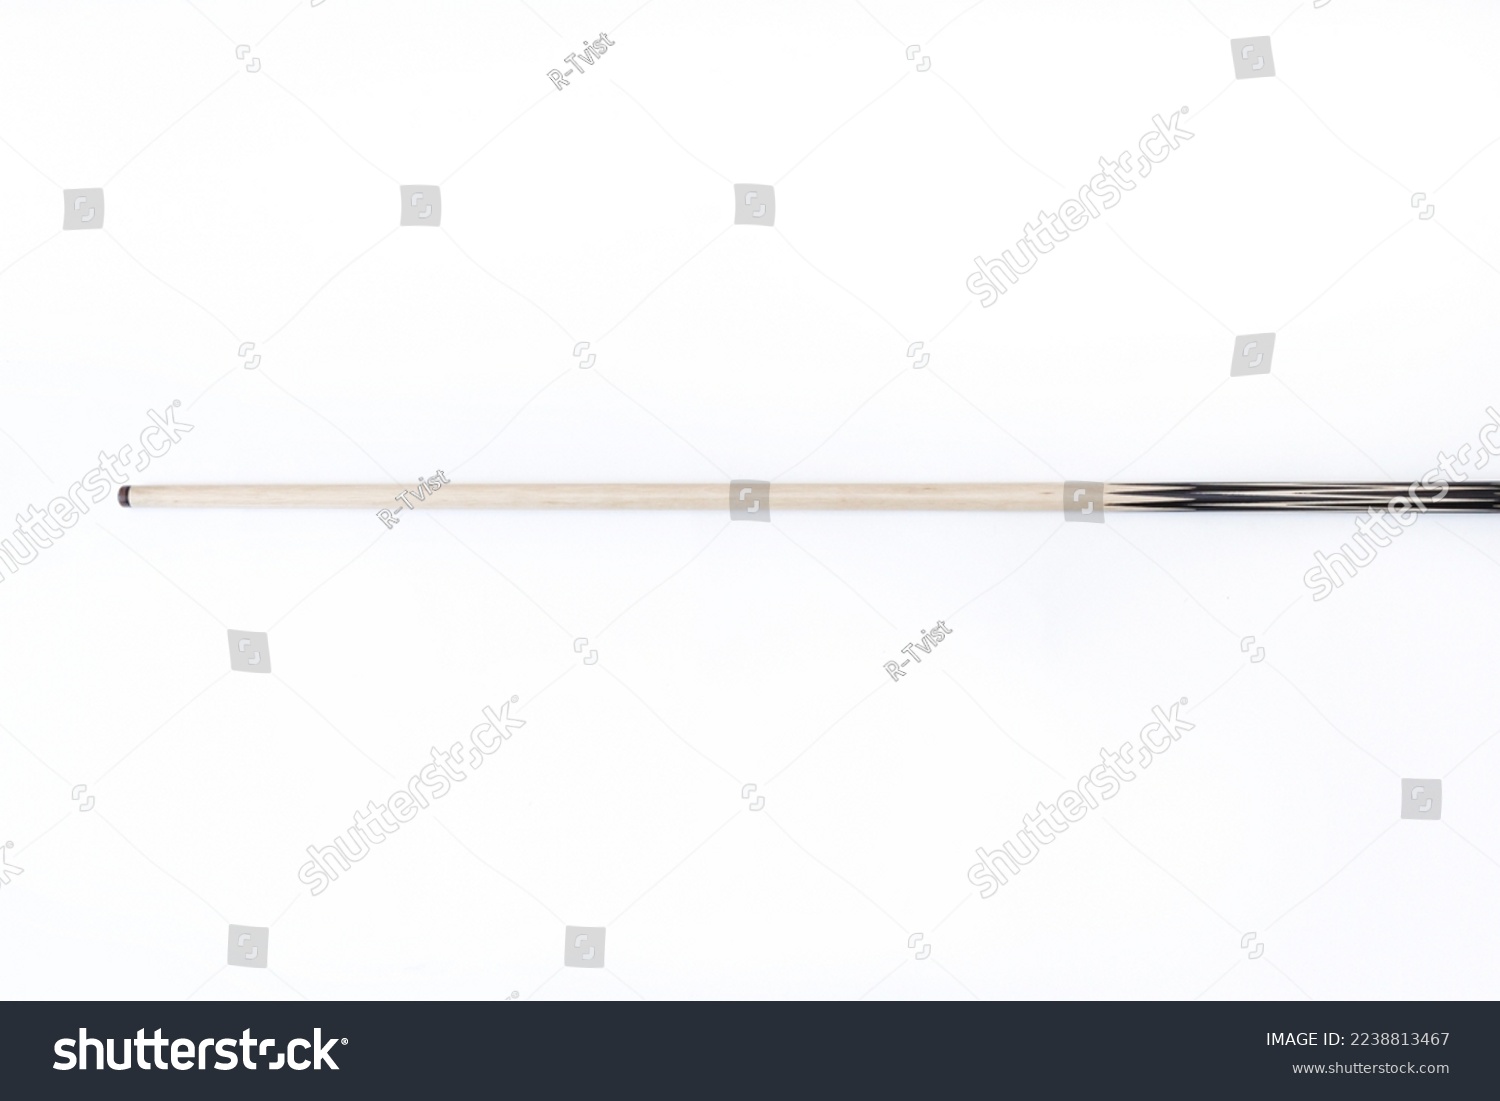 Billiard cues on a white background. Parts of a billiard cue close-up. Live photos of a billiard cue. #2238813467